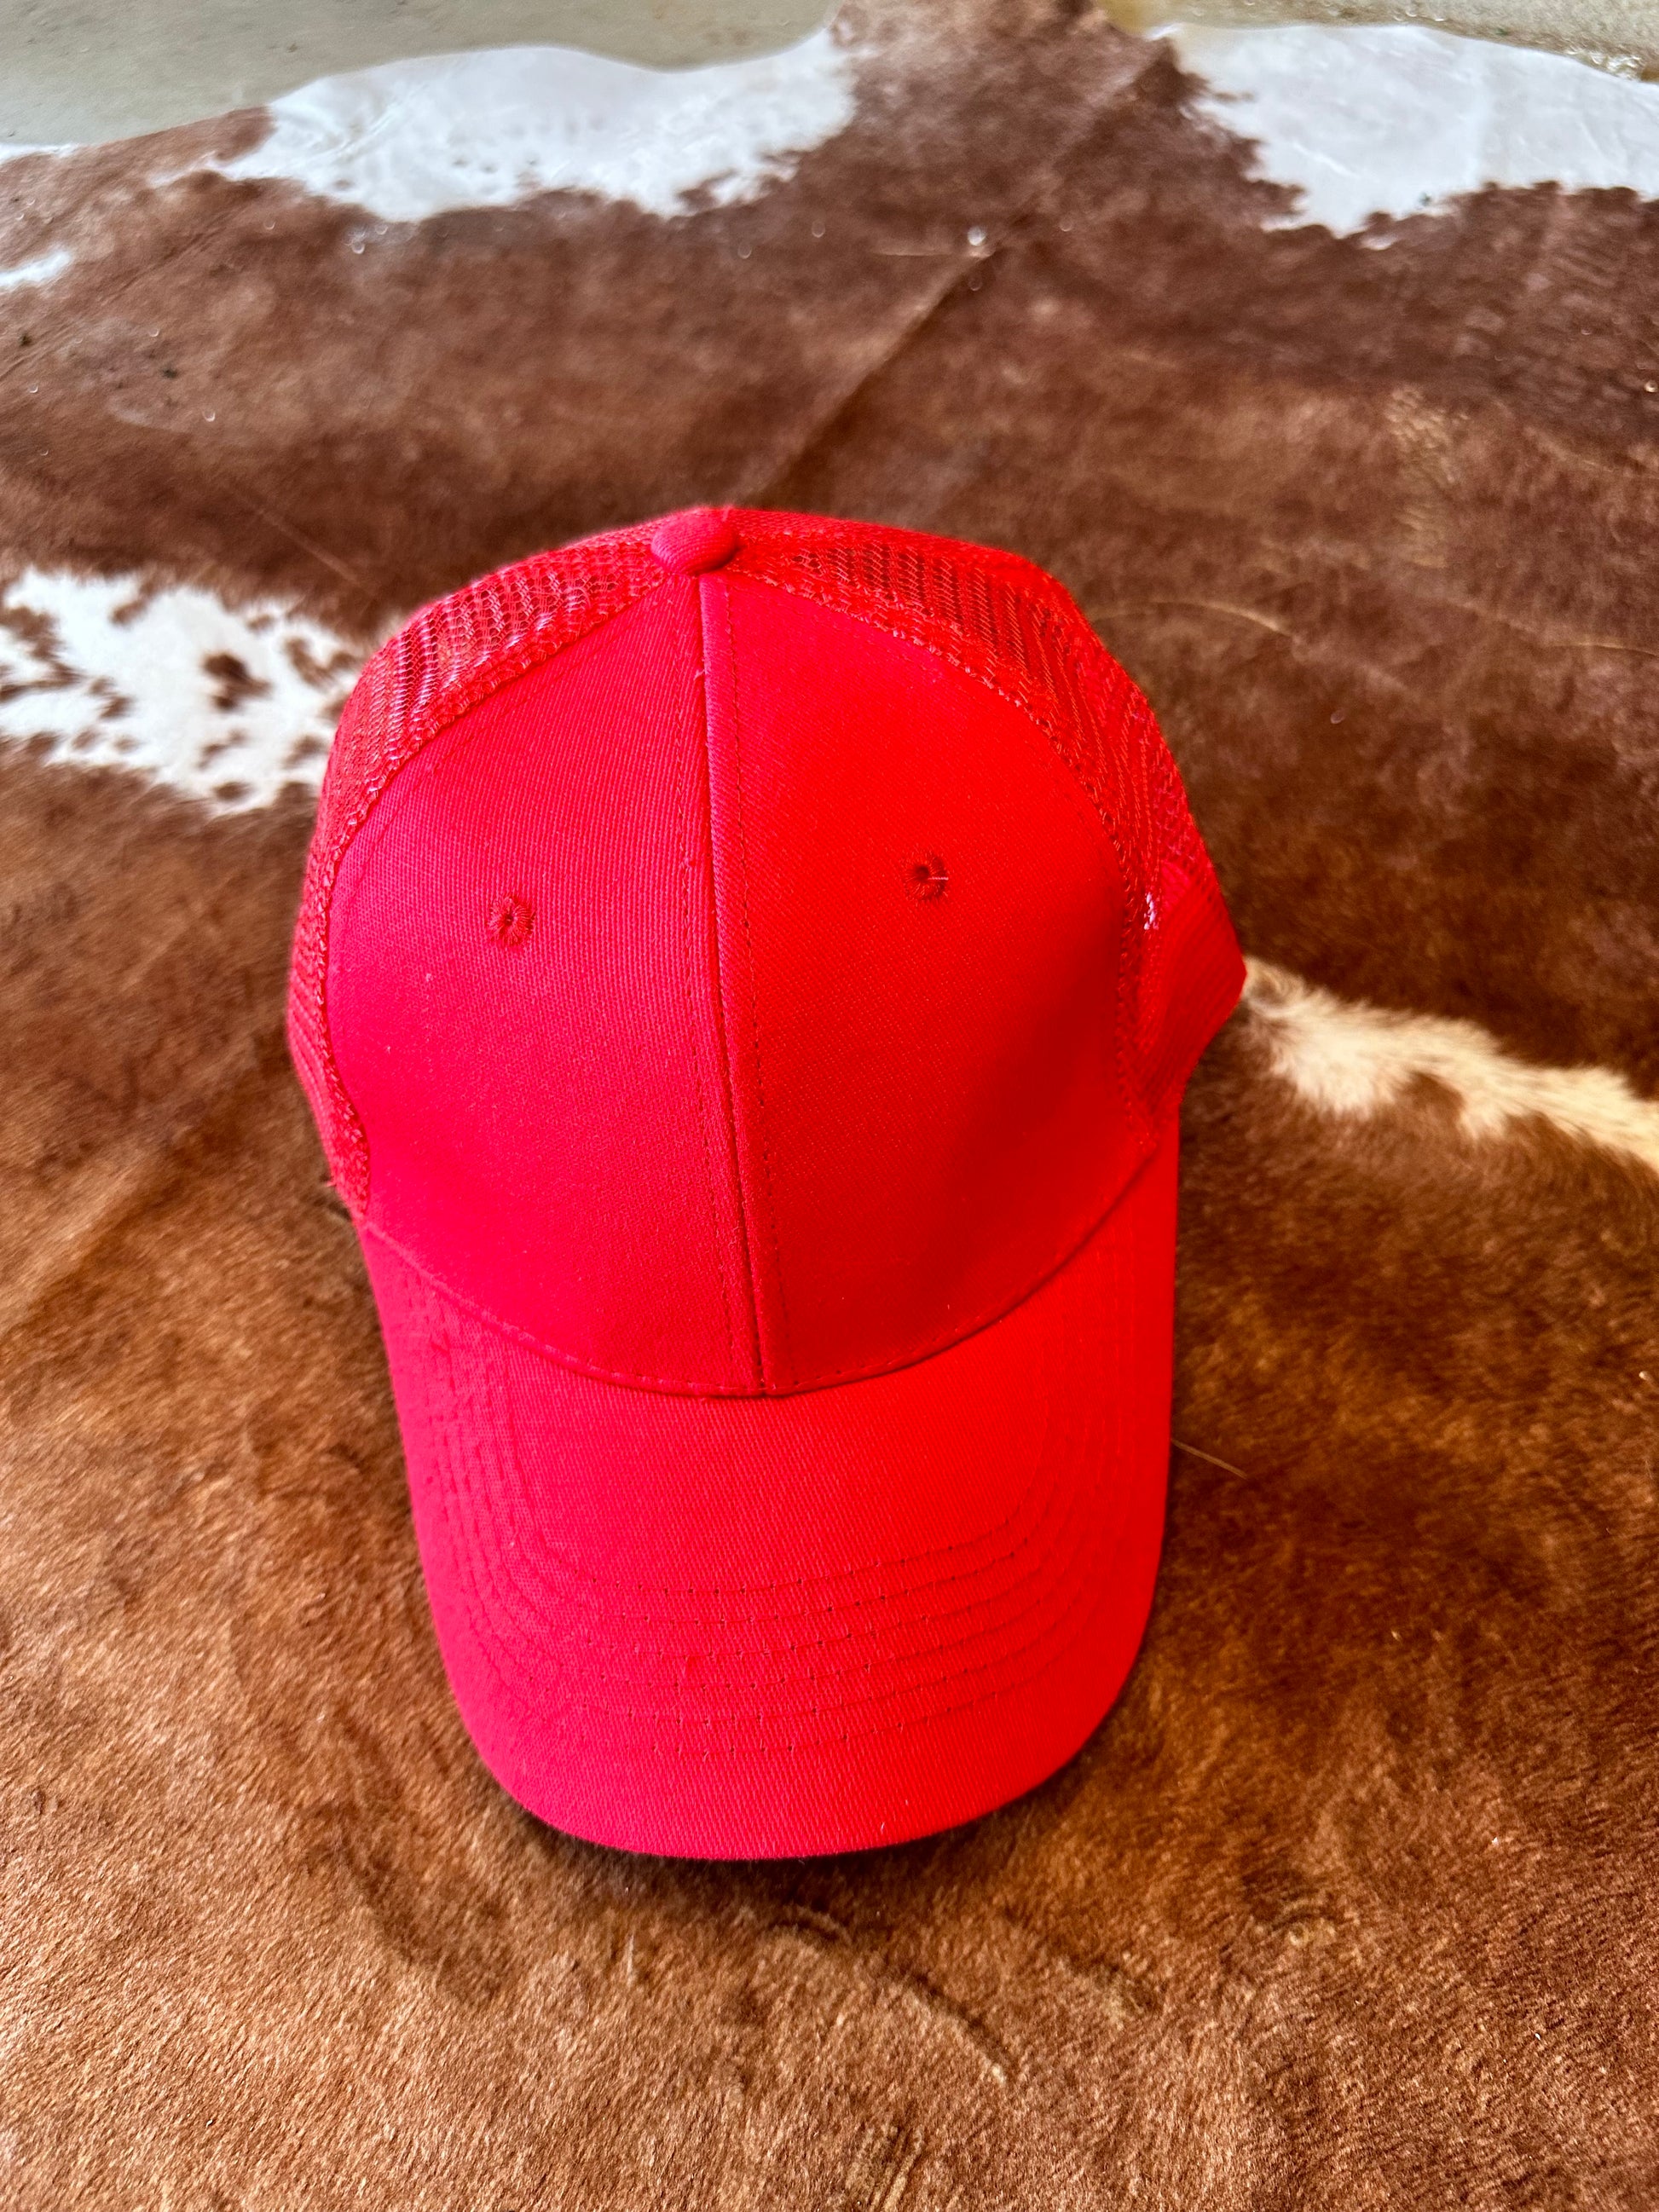 Red ball cap with structured crown and mesh back